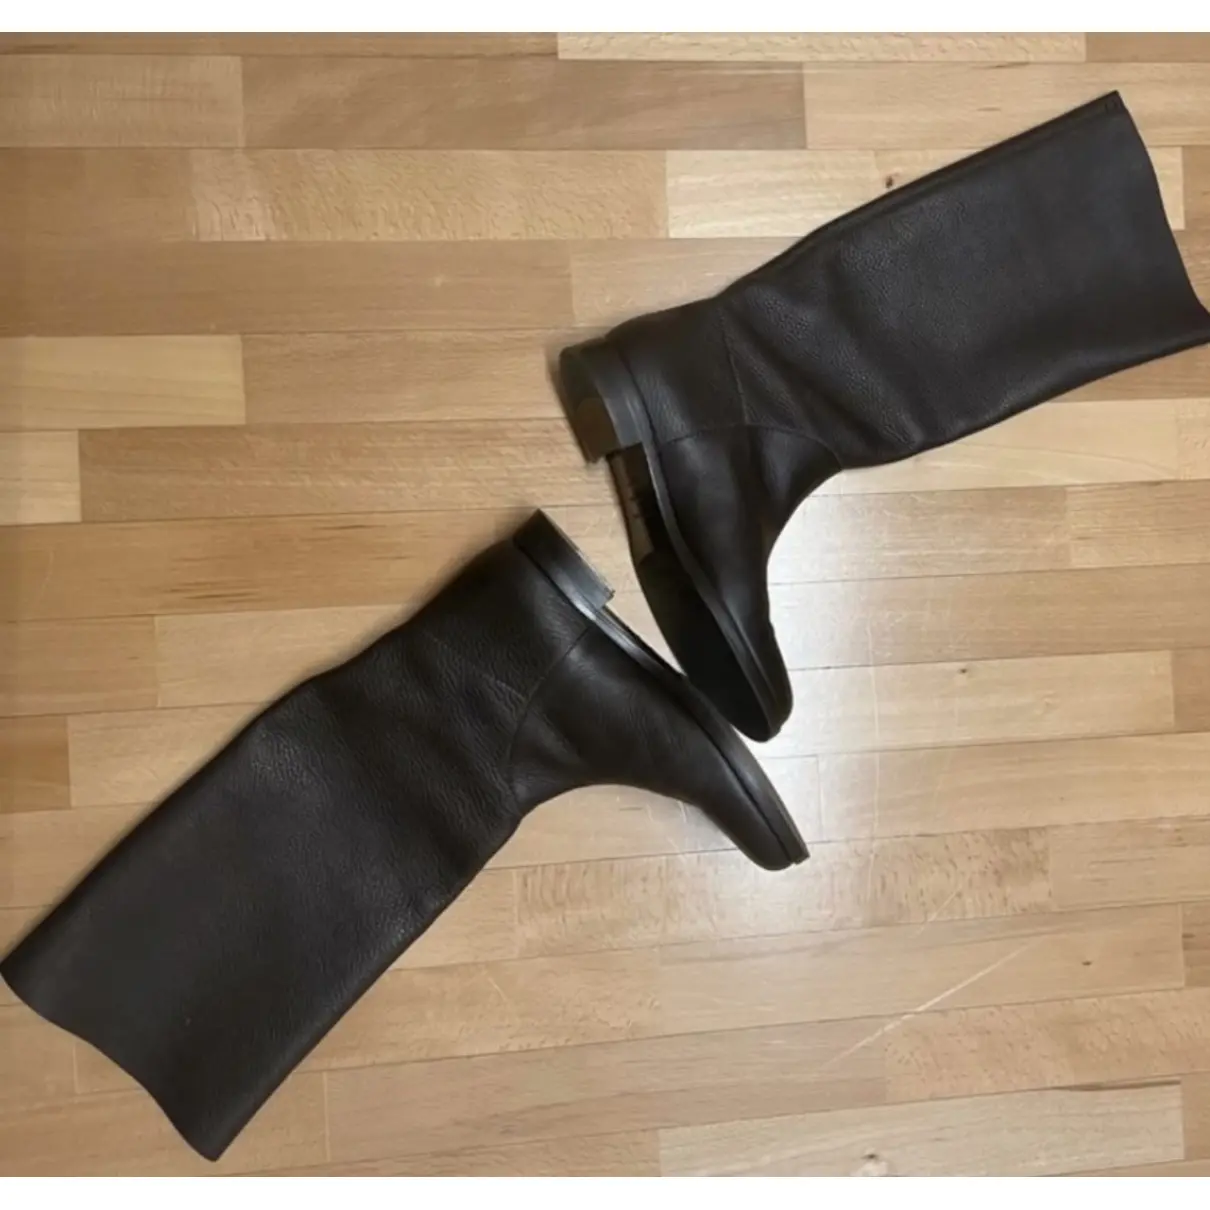 Buy Sergio Rossi SR1 leather riding boots online